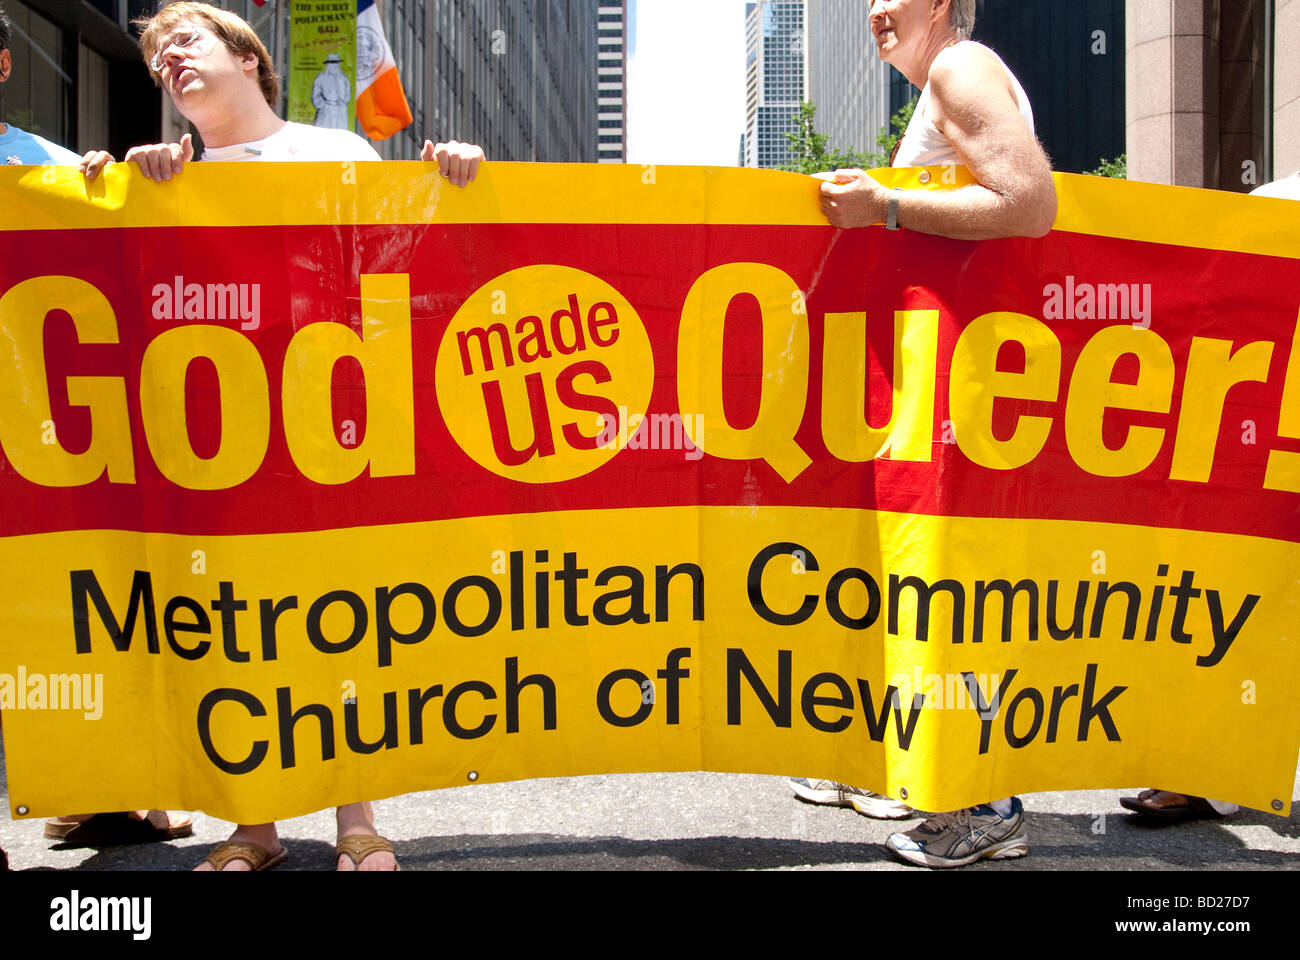 Annual Gay Pride march or parade held in New York City Stock Photo